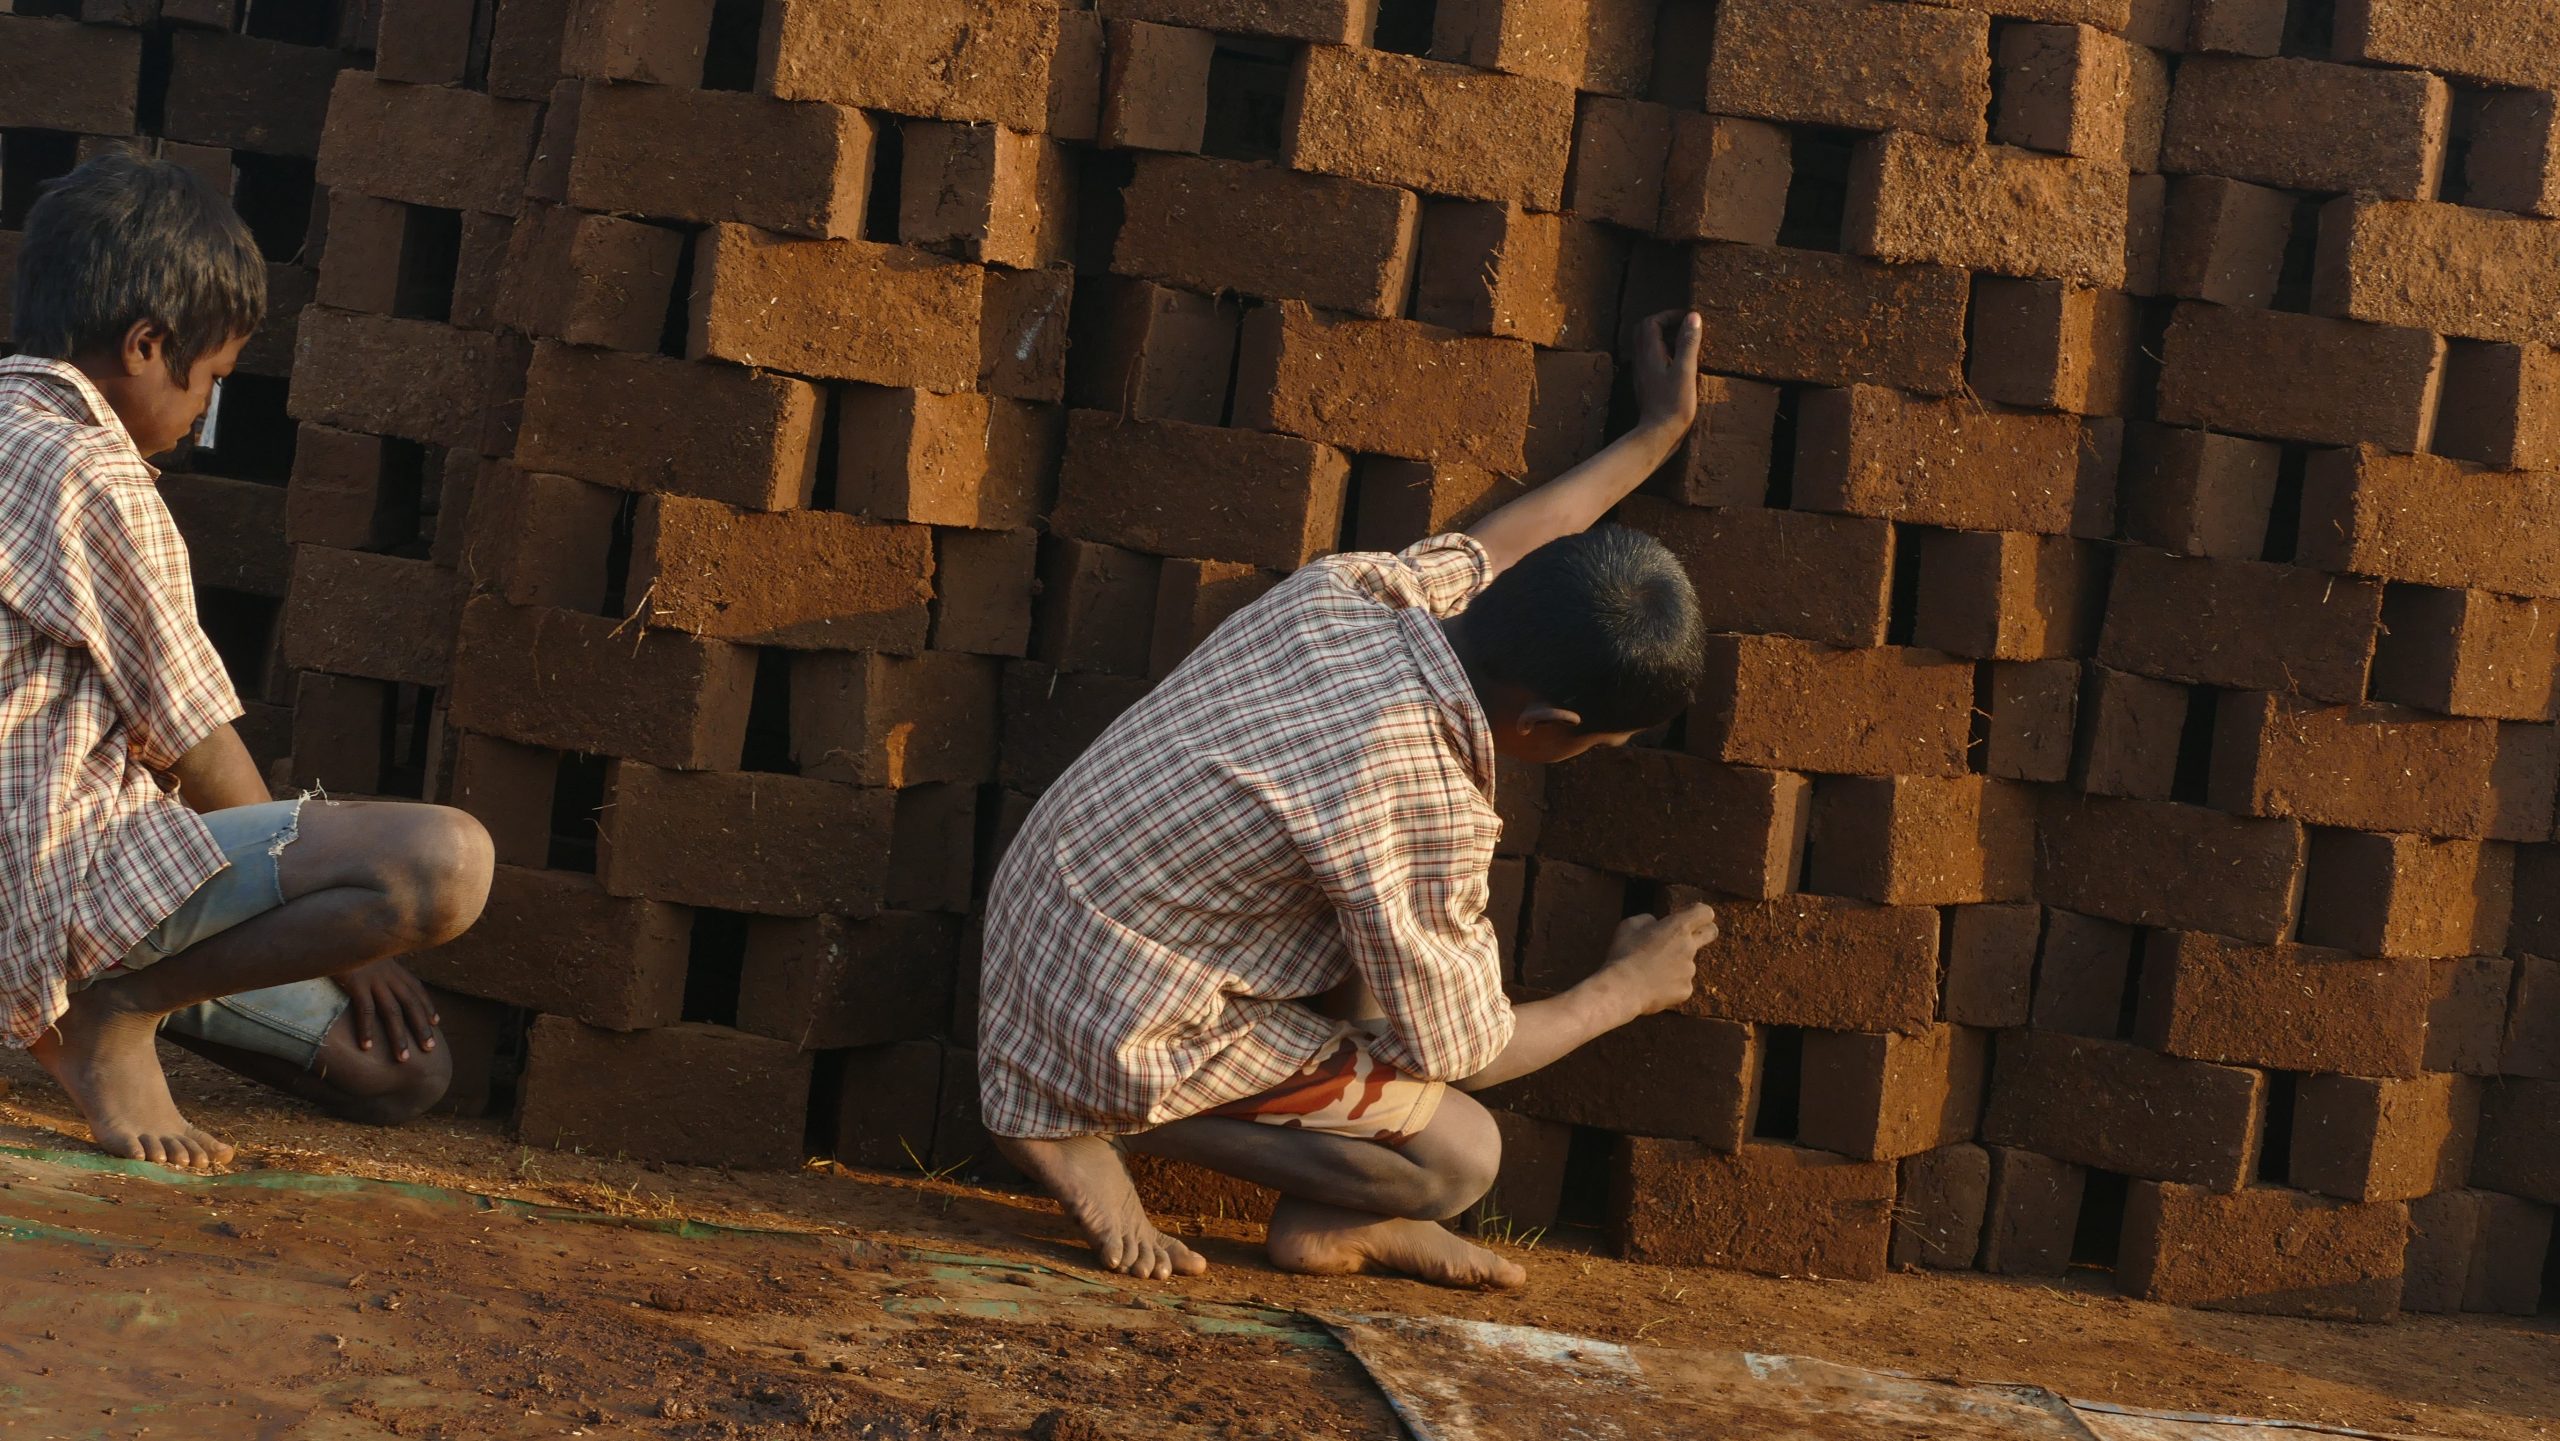 A young boy next to a brick kiln in Sonale, India